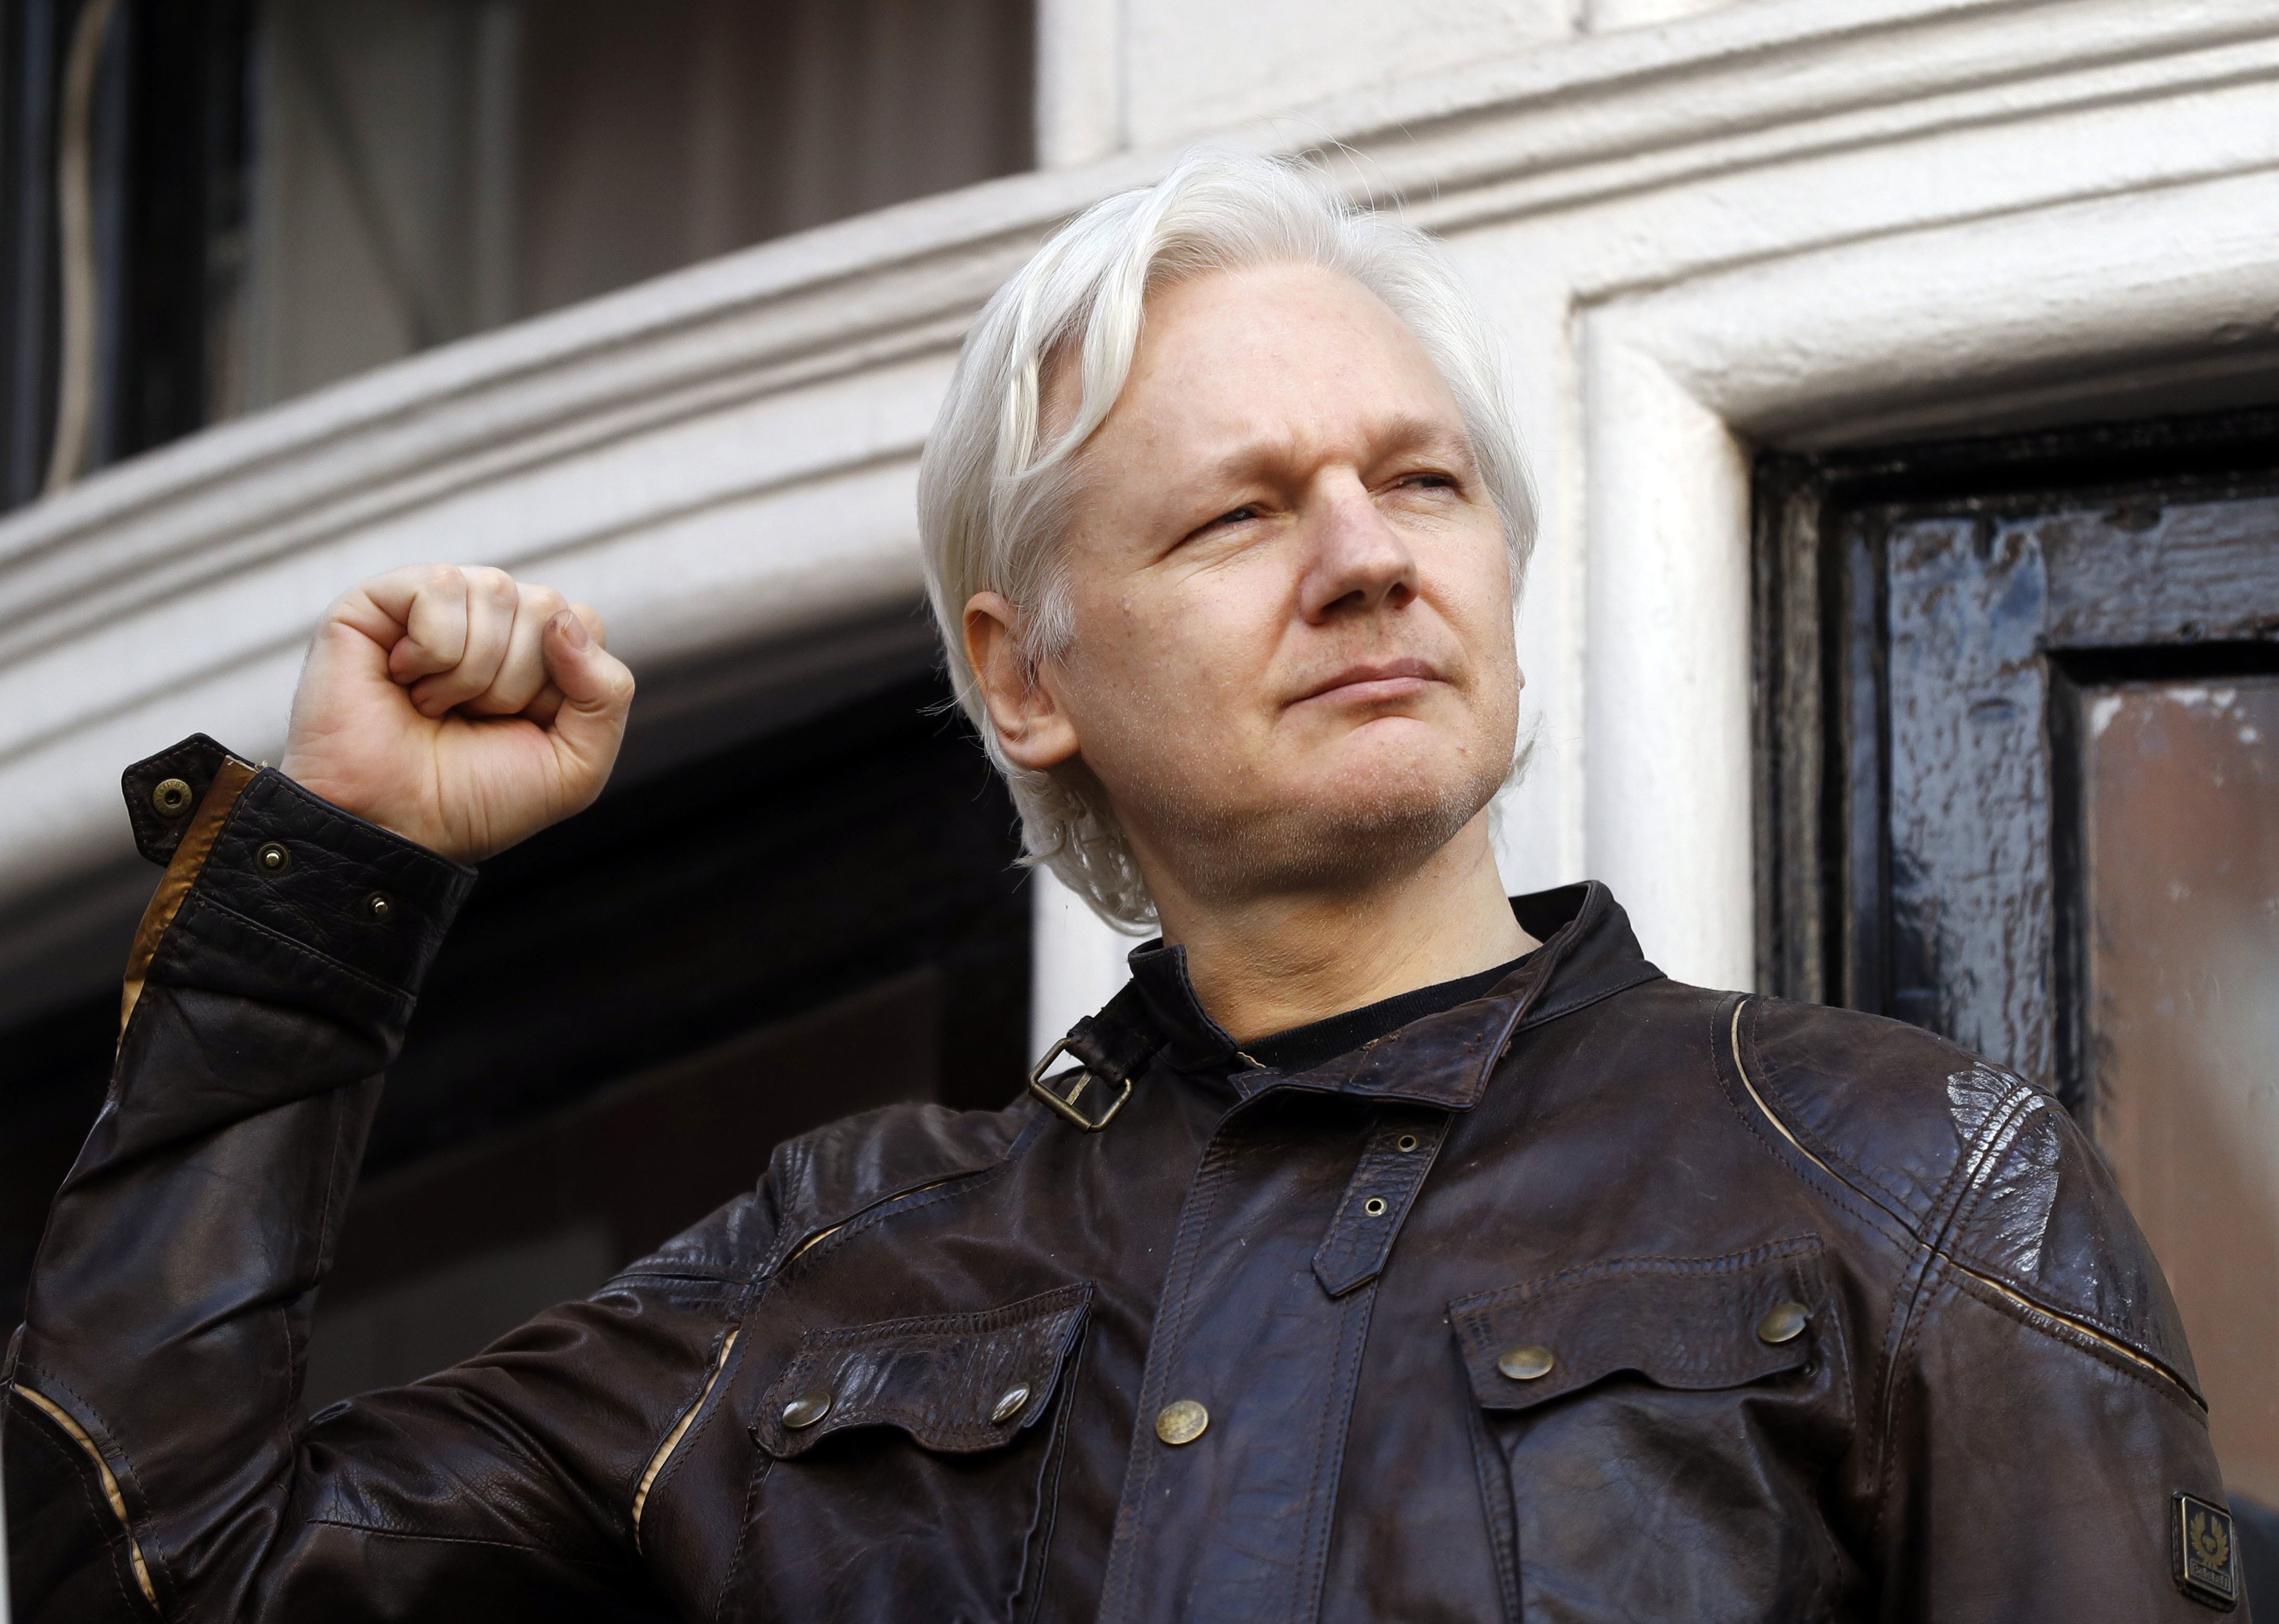 Julian Assange: Transparency icon or enemy of the state?